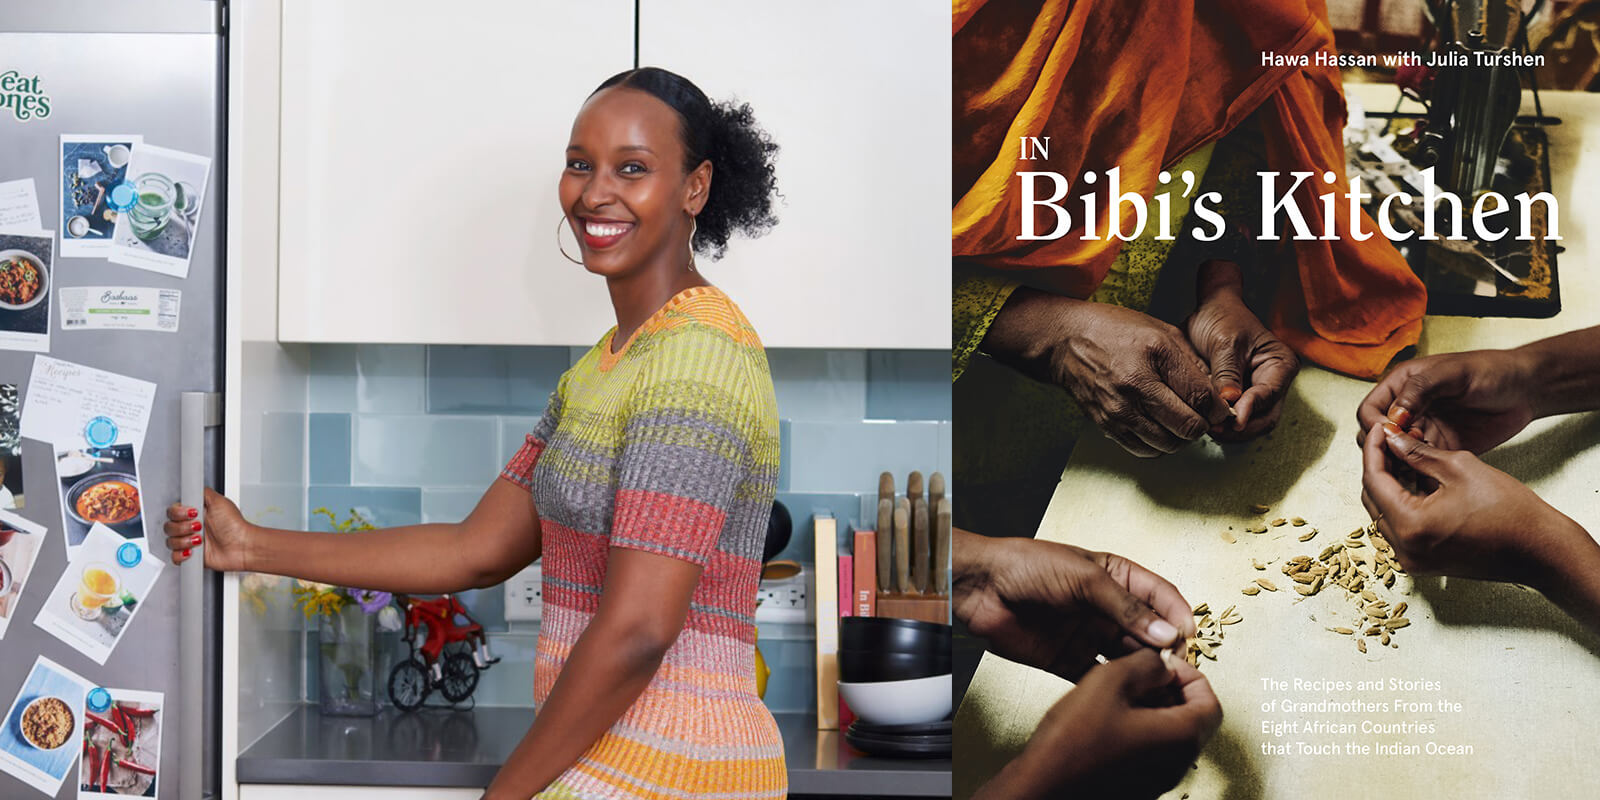 Portrait of chef Hawa Hassan and her cookbook book cover